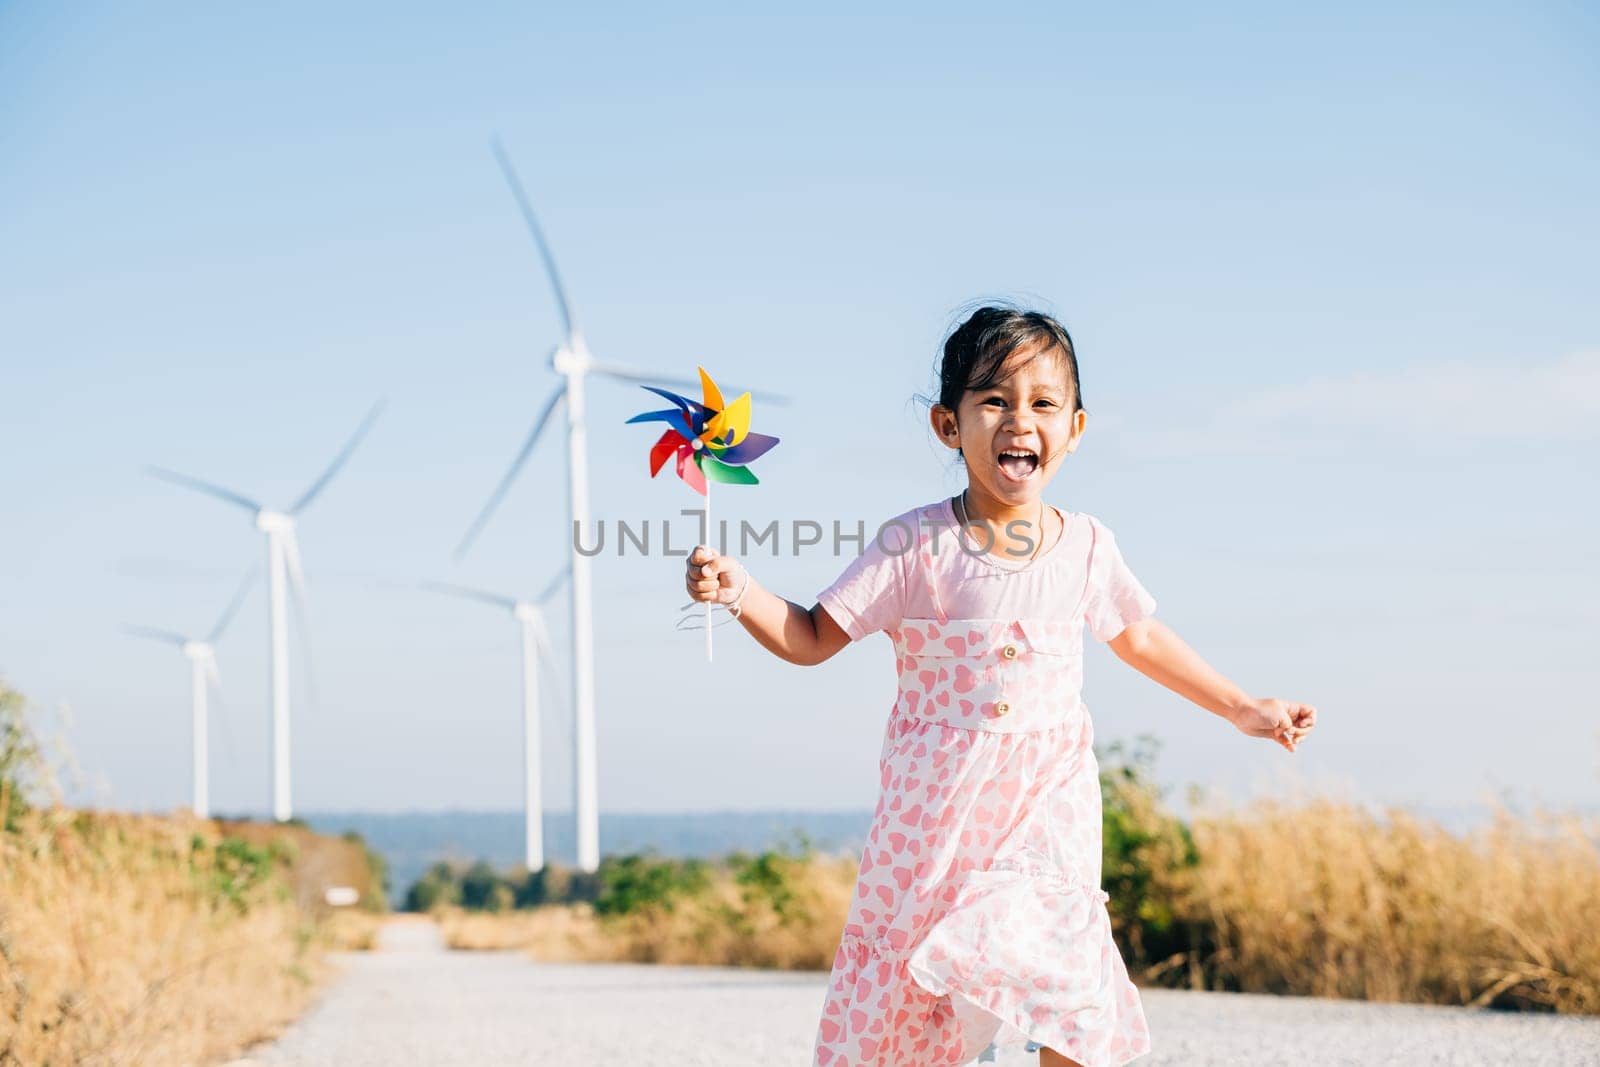 Child's joyful play near windmills, little girl runs with pinwheels. Embracing playful wind energy education and clean electricity in a picturesque sunny wind turbine setting.